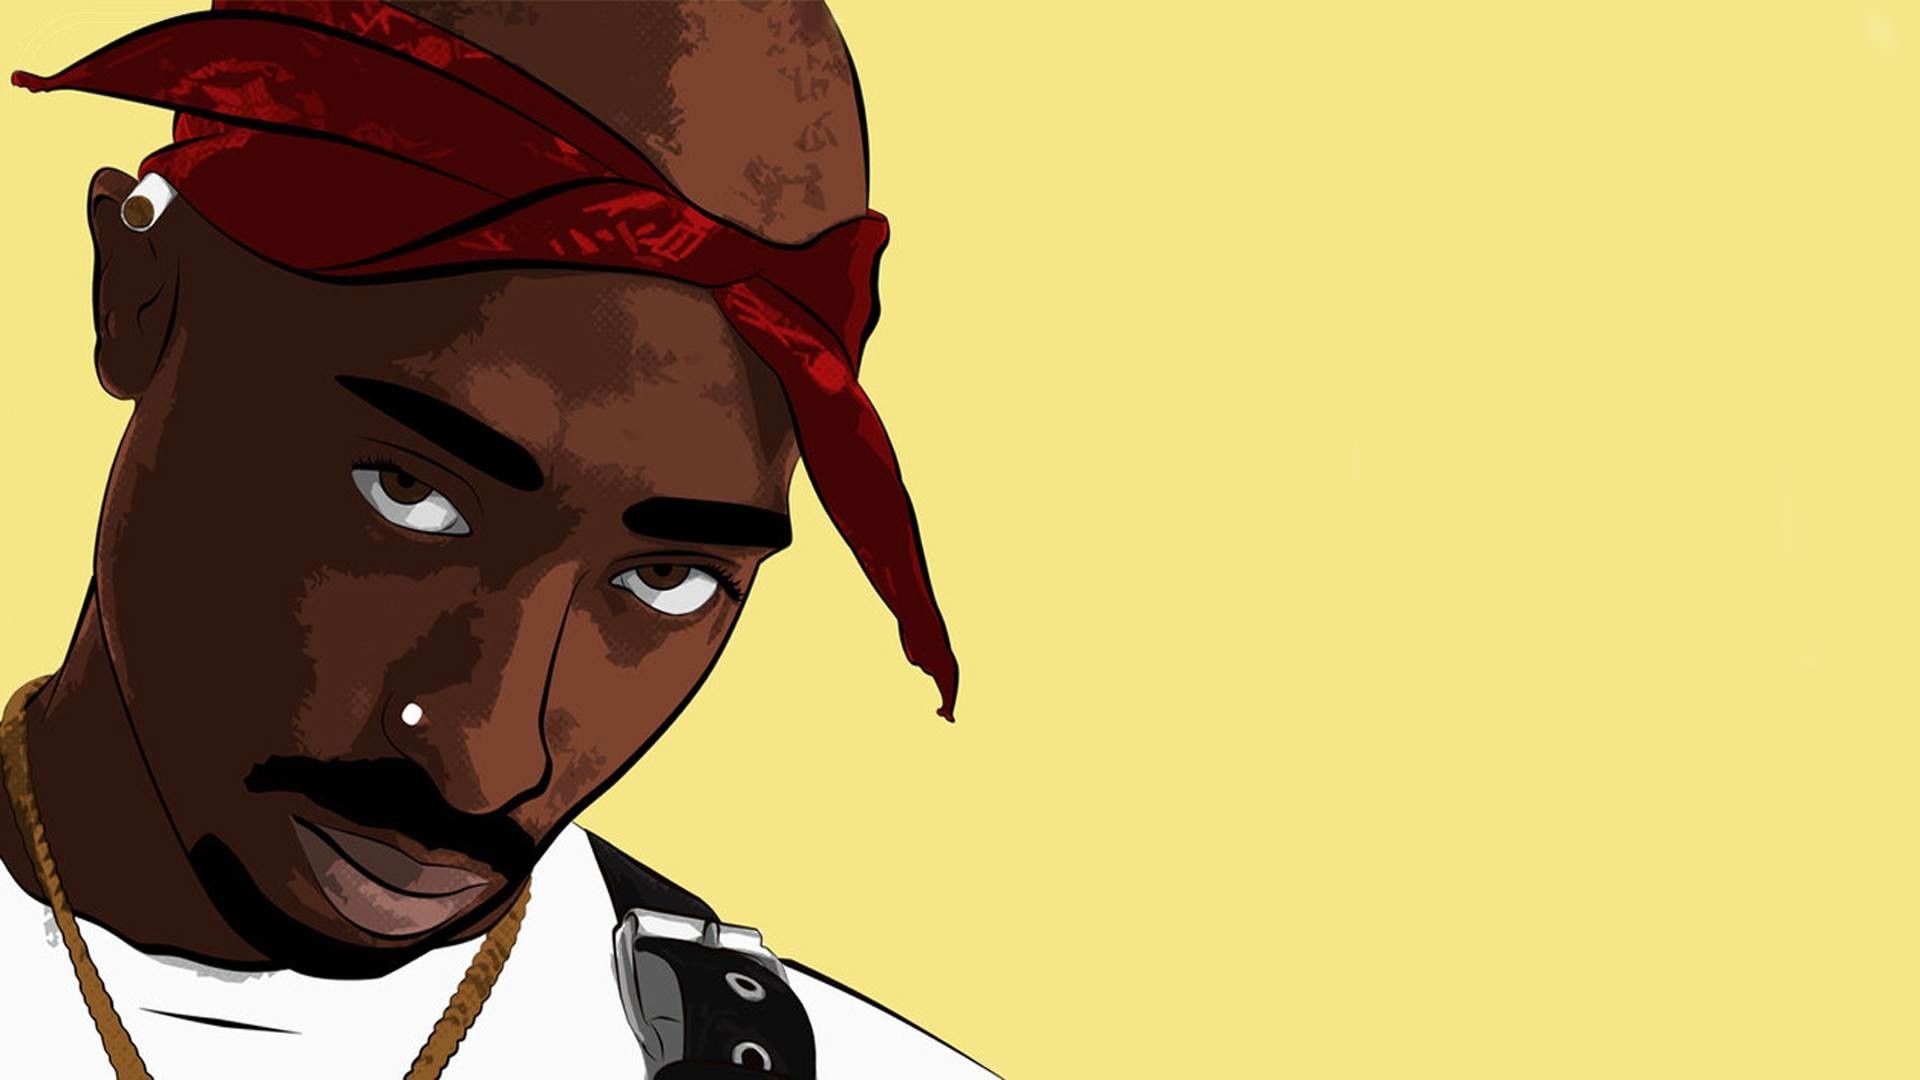 1920x1080 1280x800 Rap Hip Hop Wallpapers HD for Android - APK Download">